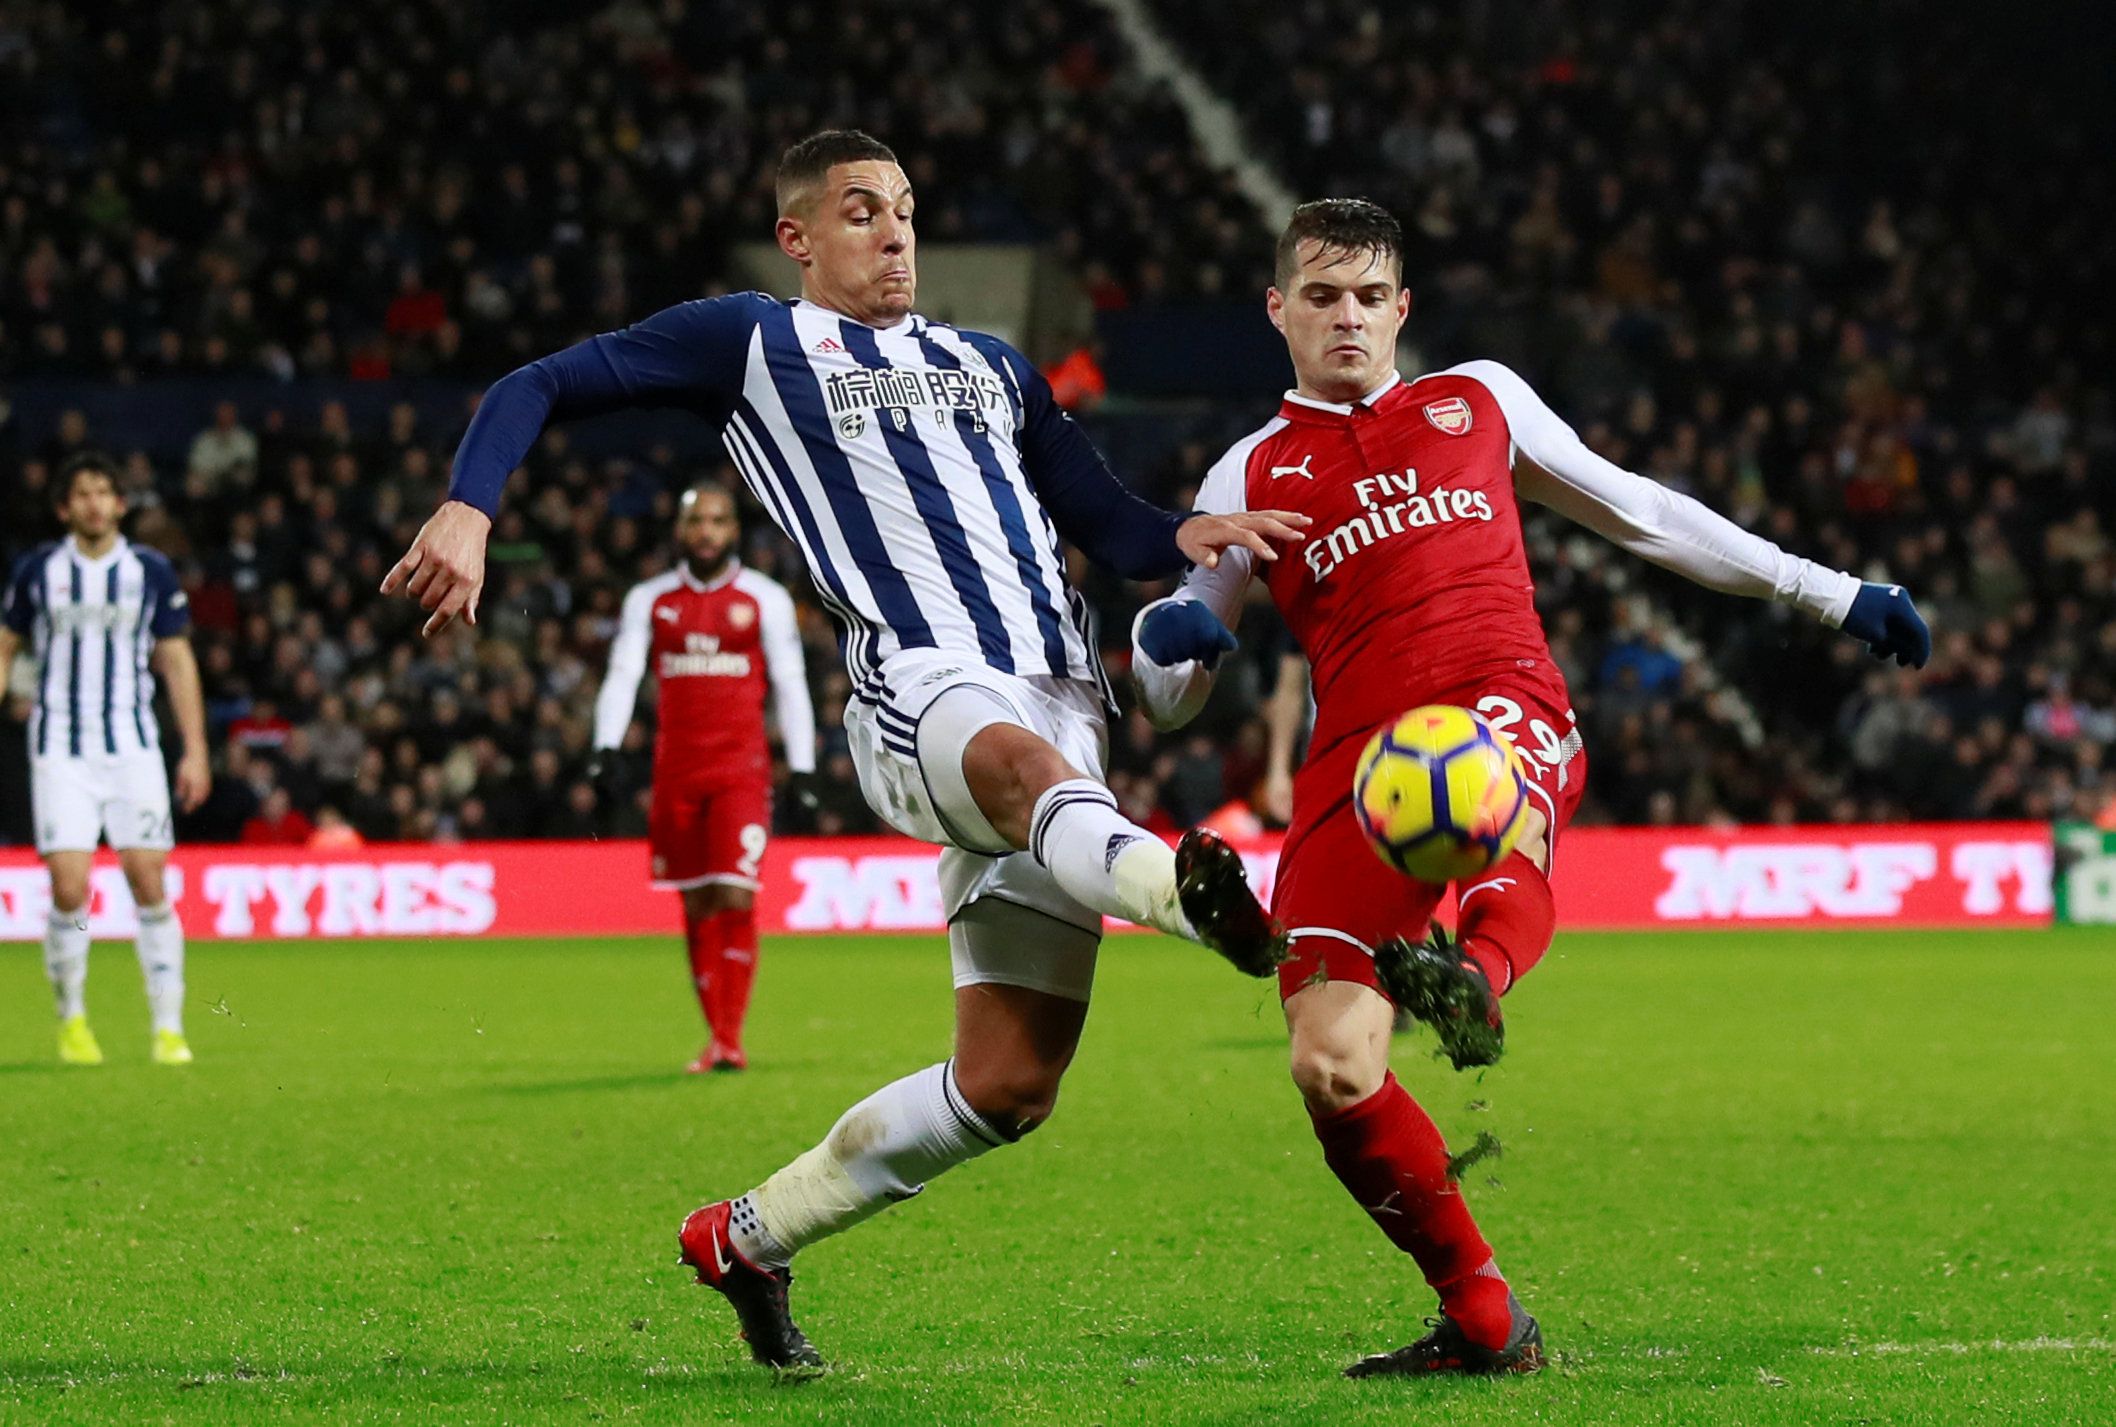 Soccer Football - Premier League - West Bromwich Albion vs Arsenal - The Hawthorns, West Bromwich, Britain - December 31, 2017   Arsenal's Granit Xhaka in action with West Bromwich Albion's Jake Livermore      Action Images via Reuters/Jason Cairnduff    EDITORIAL USE ONLY. No use with unauthorized audio, video, data, fixture lists, club/league logos or 